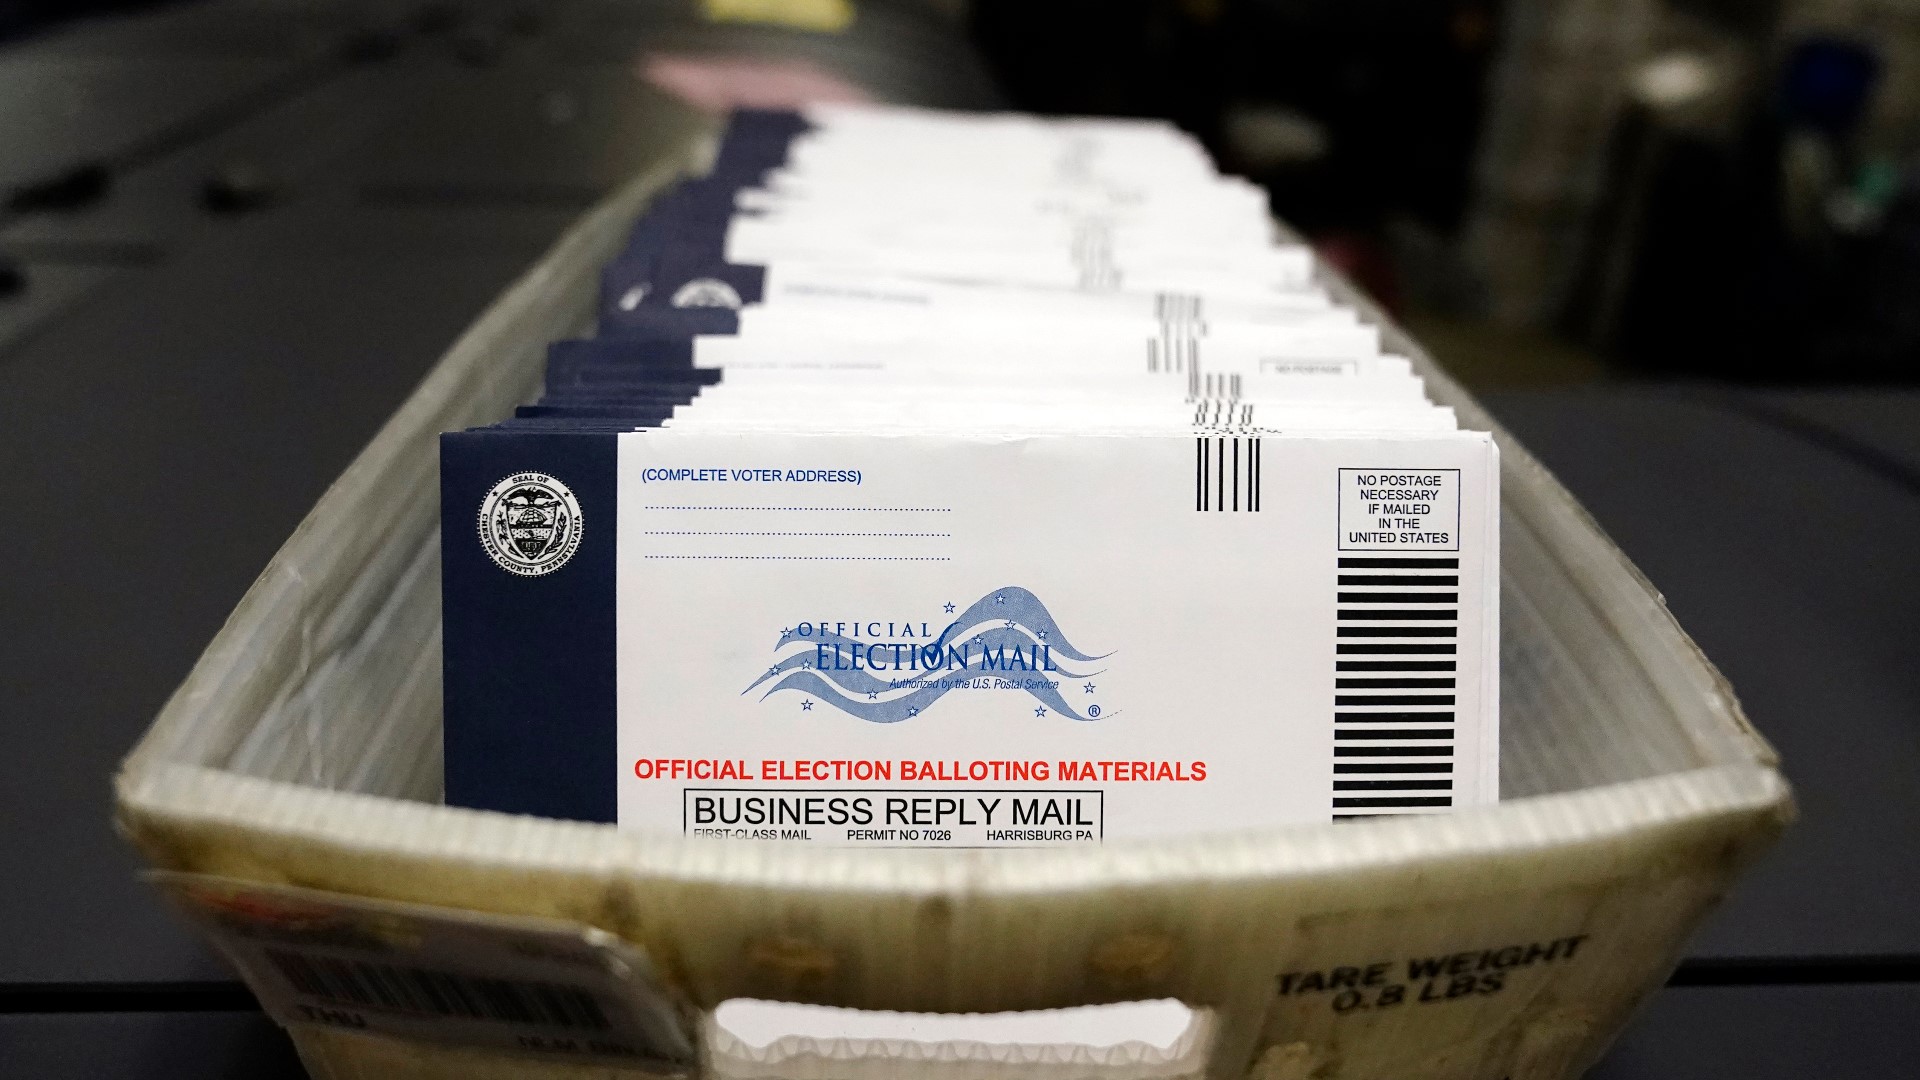 Republican officials in the North Carolina General Assembly are trying to push a new bill that would limit how many mail-in ballots get counted during an election.